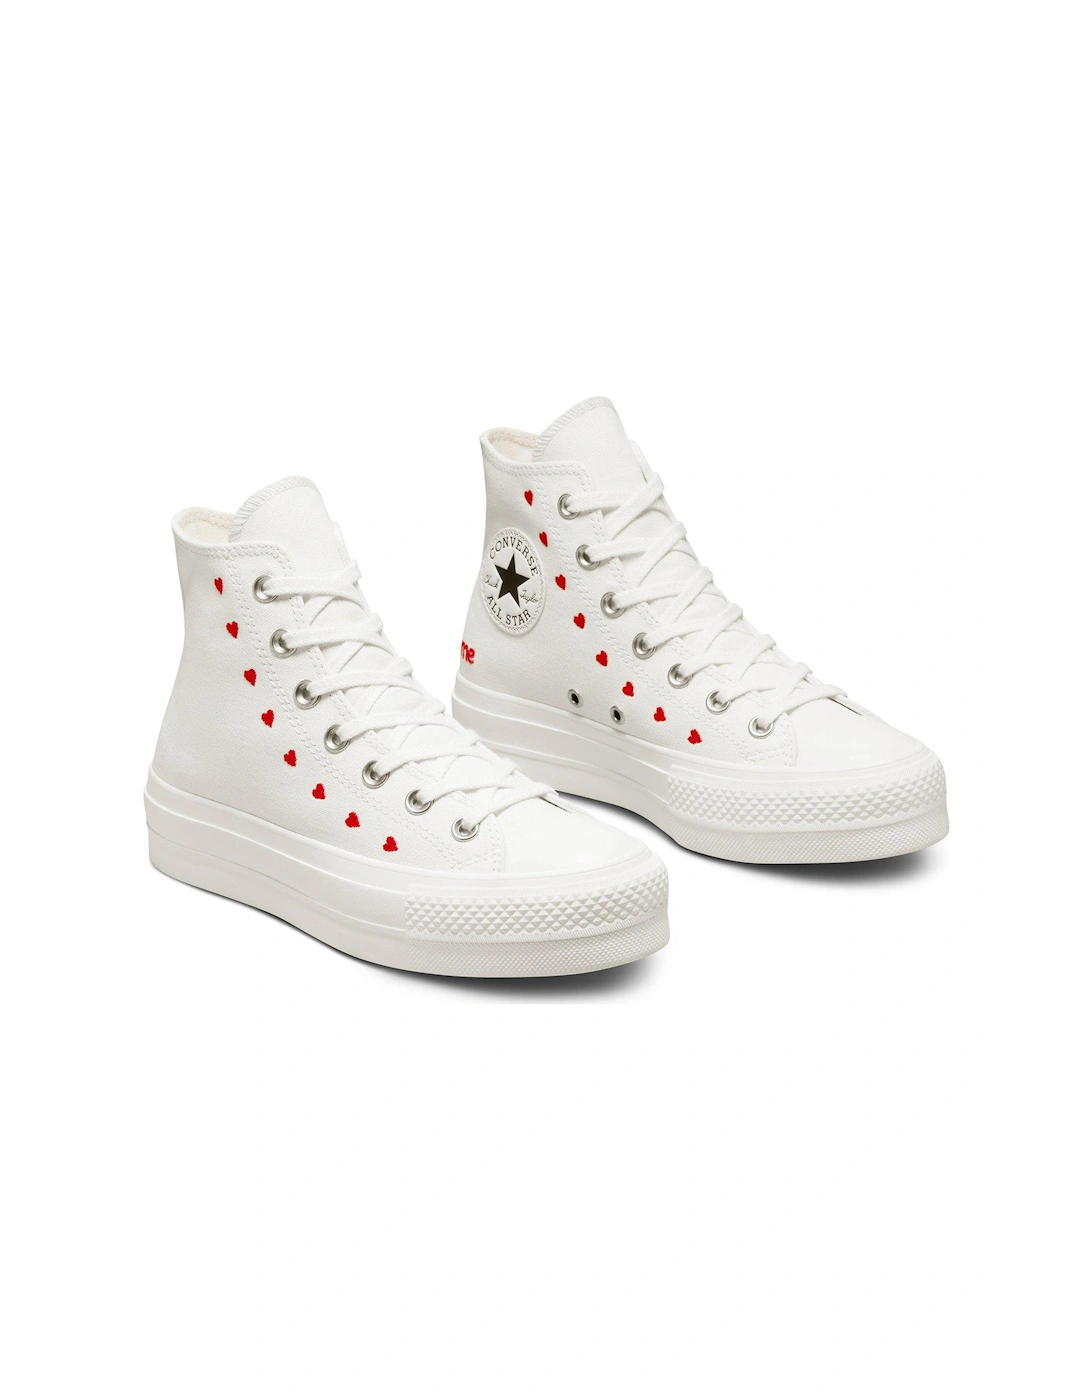 Chuck Taylor All Star Lift Hi Top Plimsolls - White/Red, 7 of 6